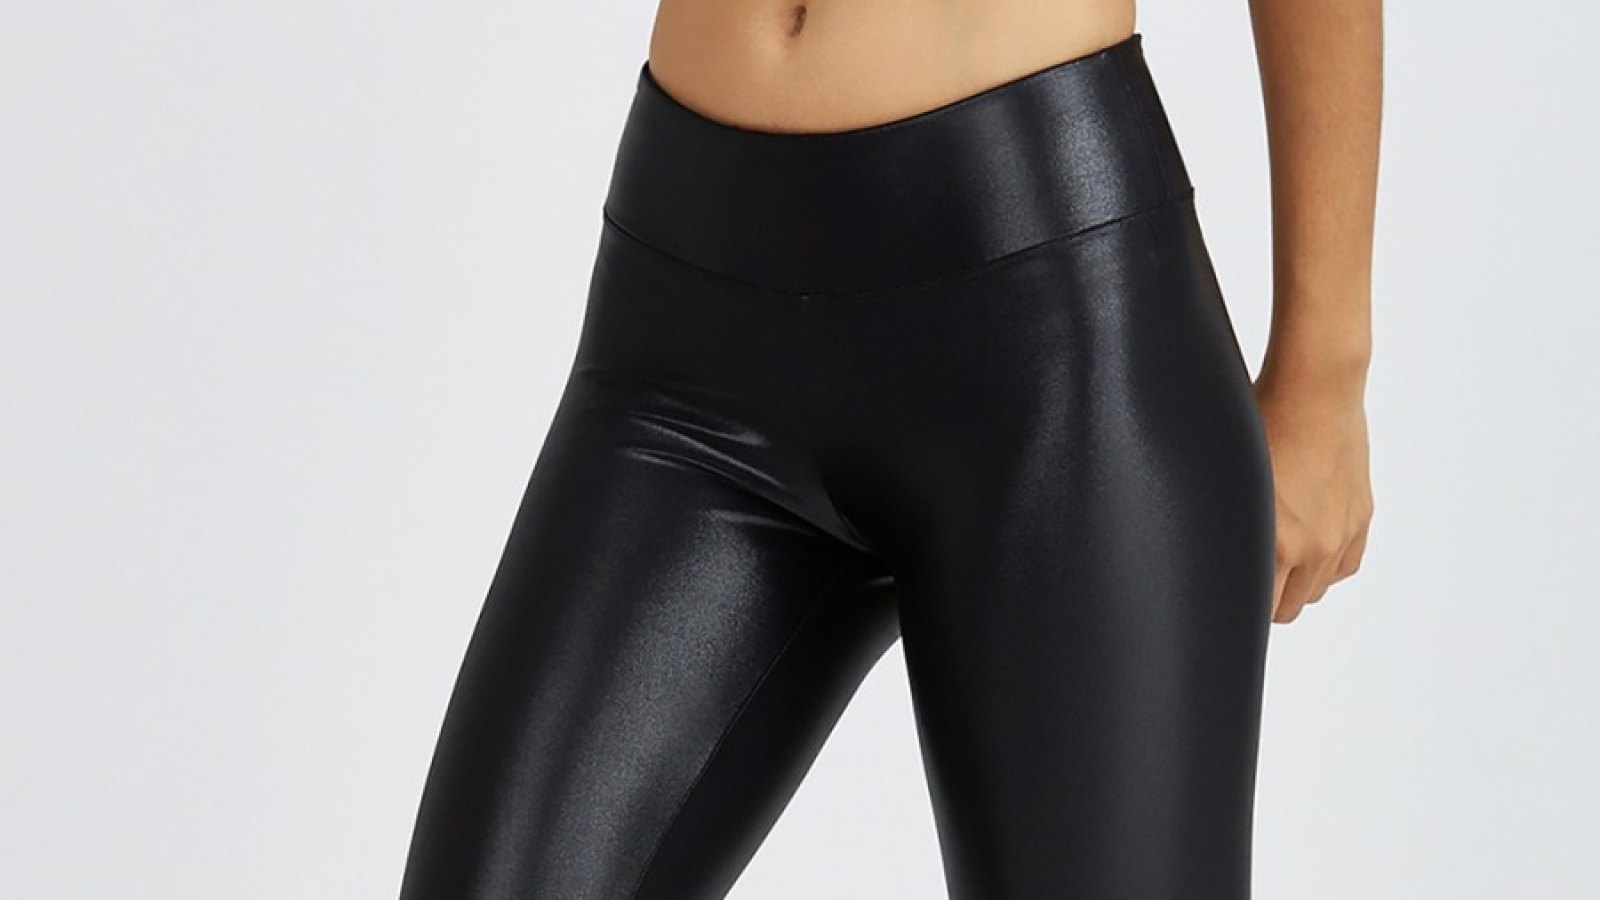 Make a Sleek Statement With These Liquid Leggings